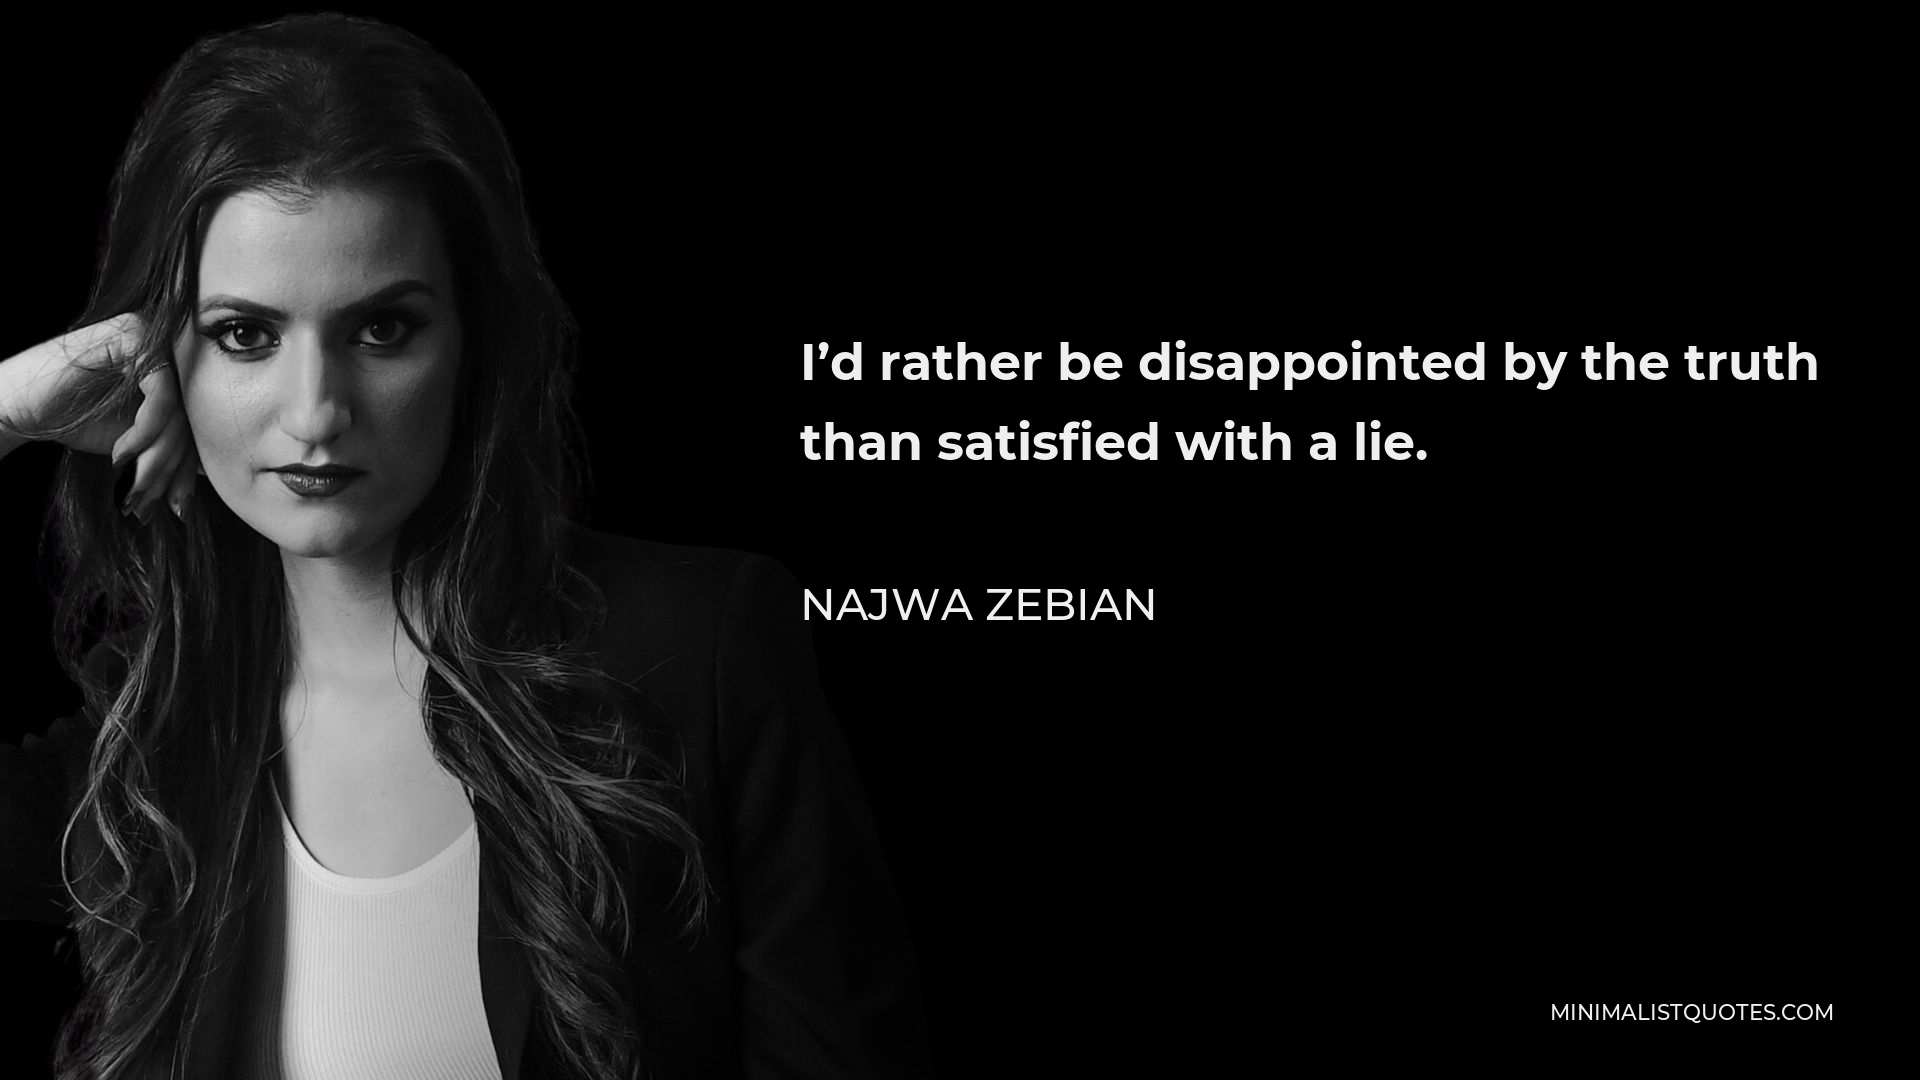 Najwa Zebian Quote - I’d rather be disappointed by the truth than satisfied with a lie.